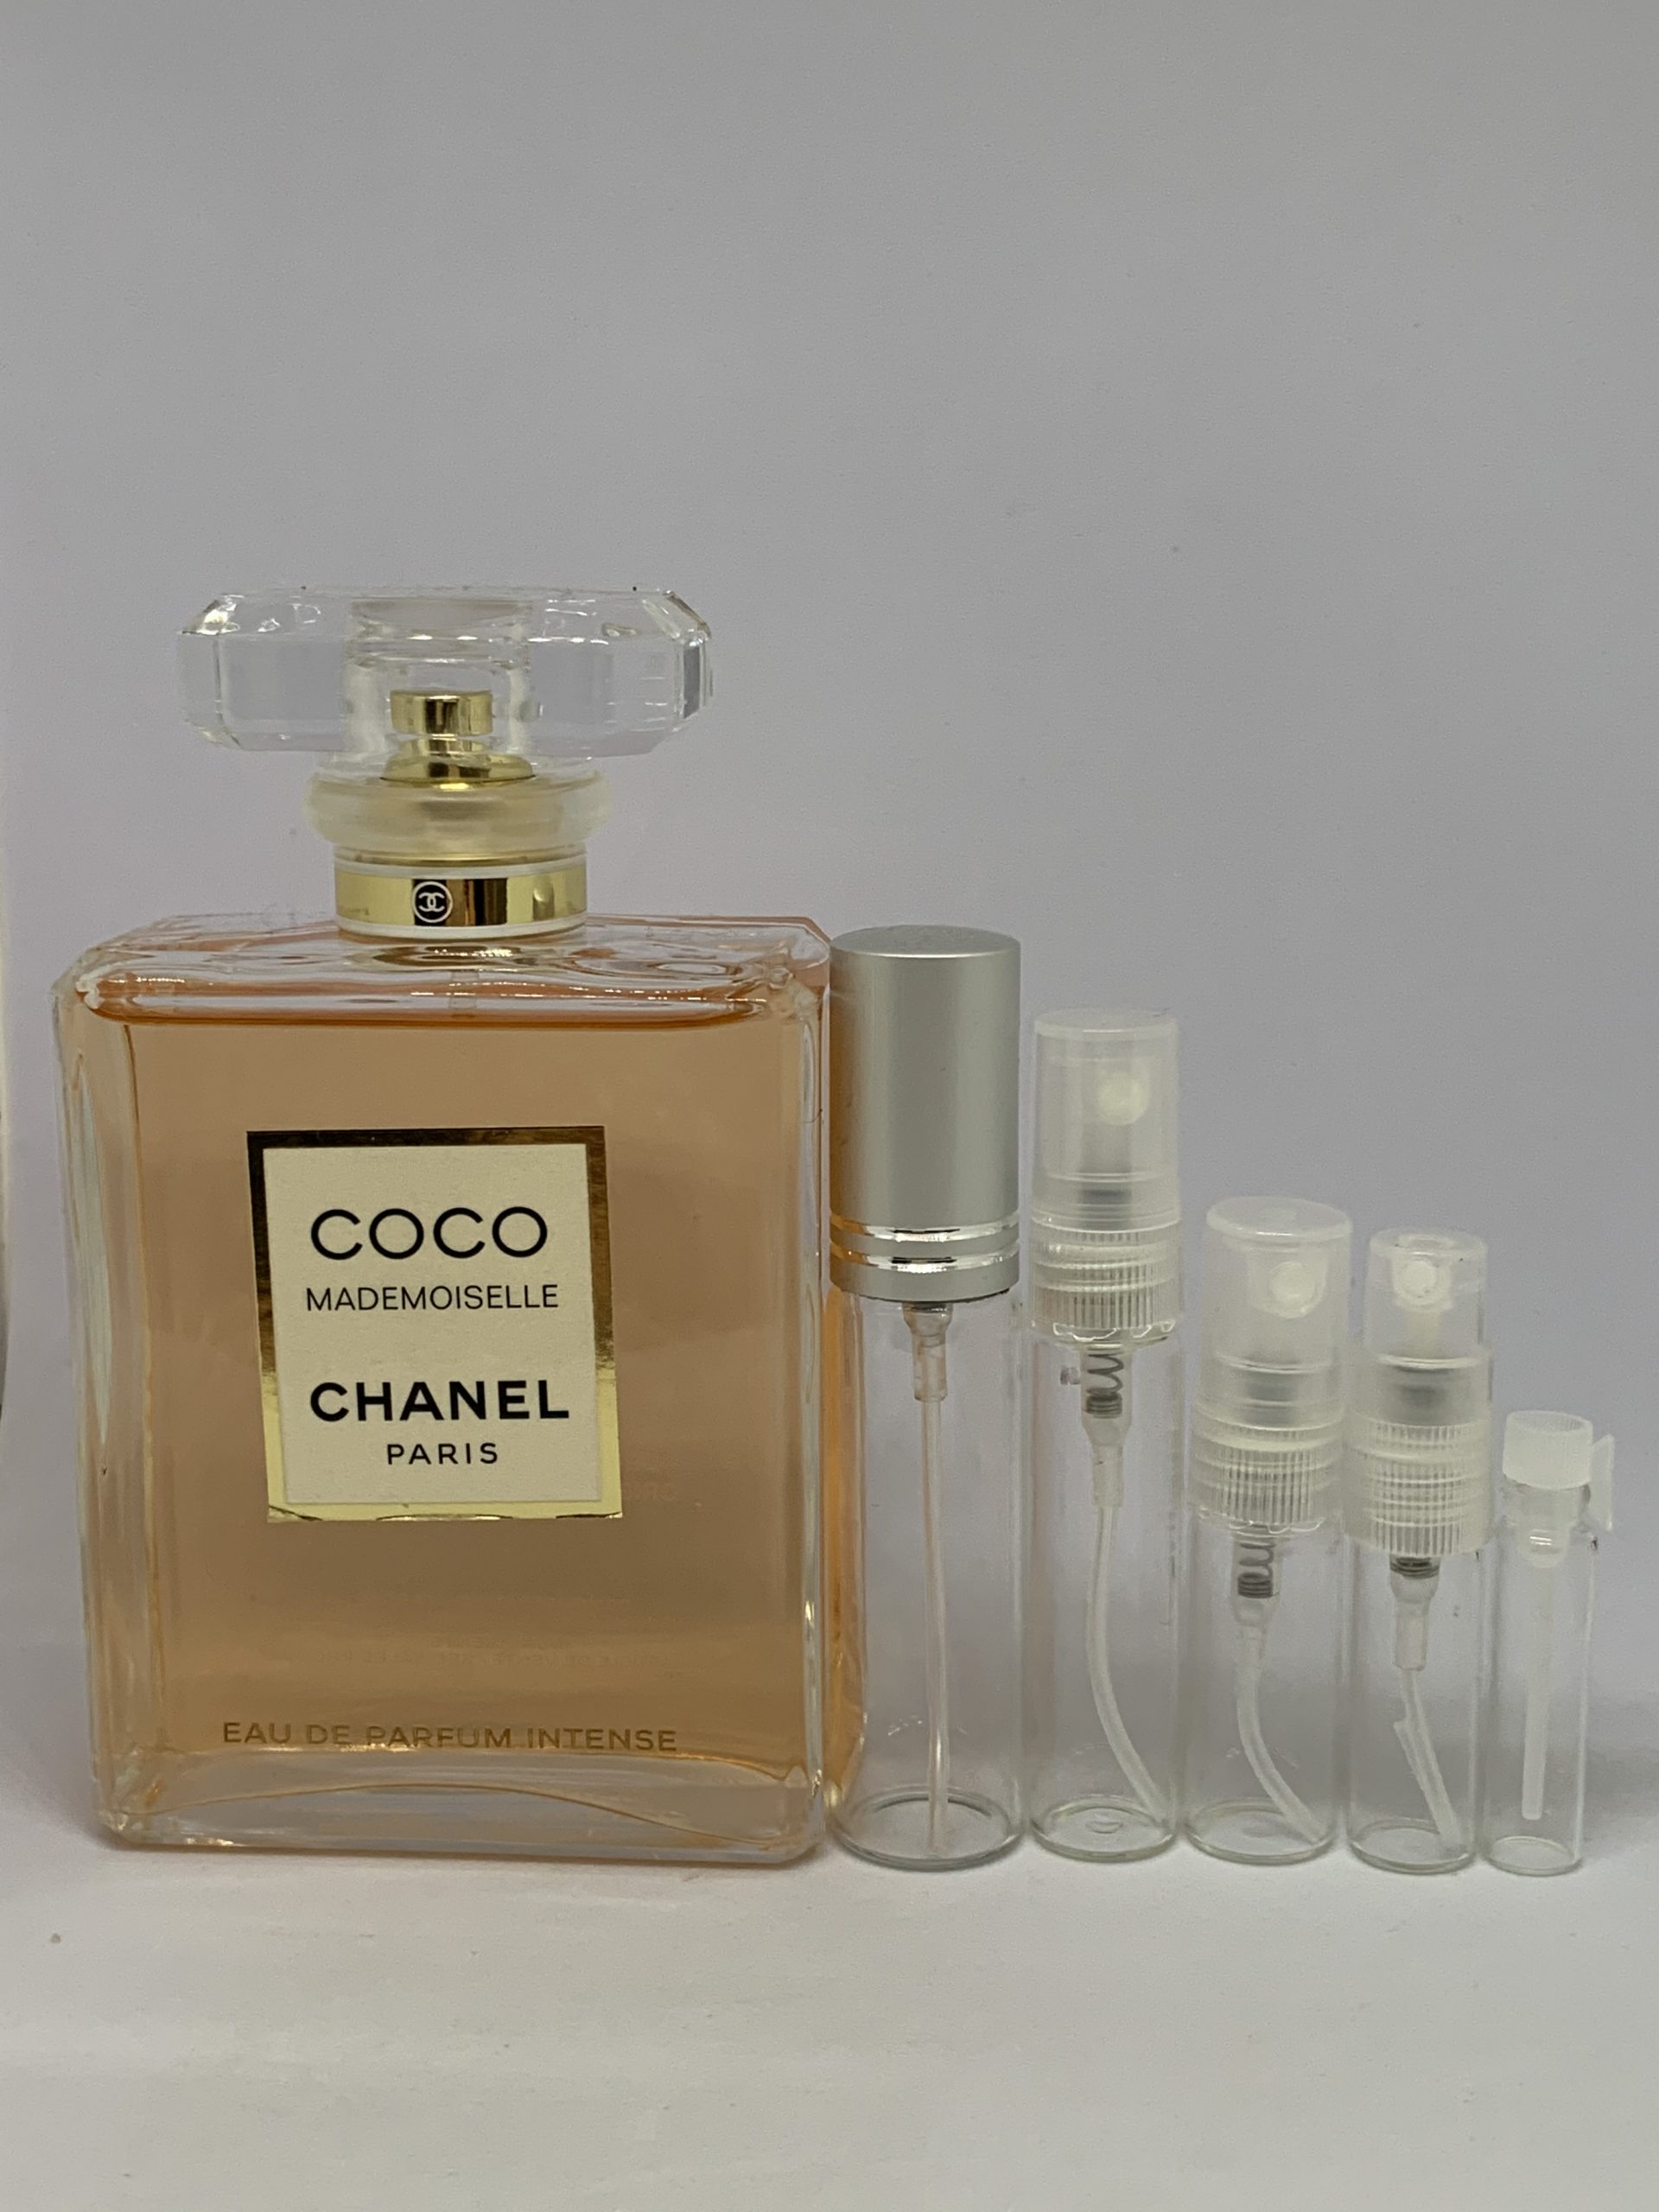 Coco Mademoiselle Intense EDP by Chanel - Scent Samples